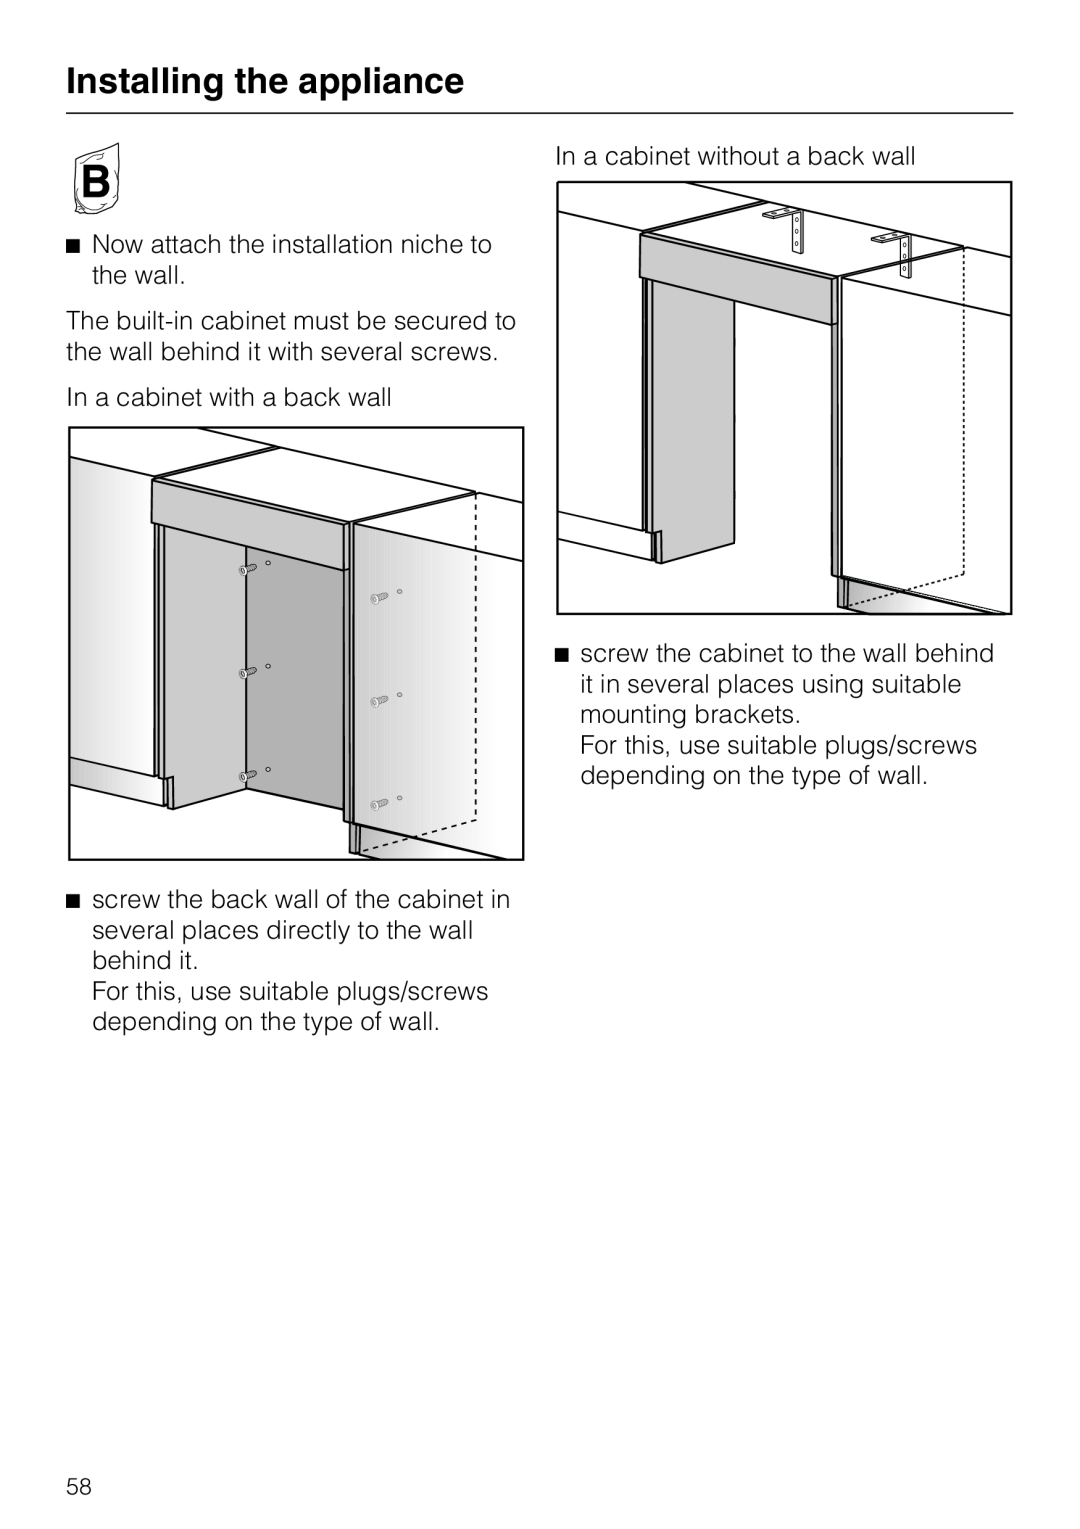 Miele F 1411 Vi installation instructions Installing the appliance, Now attach the installation niche to the wall 